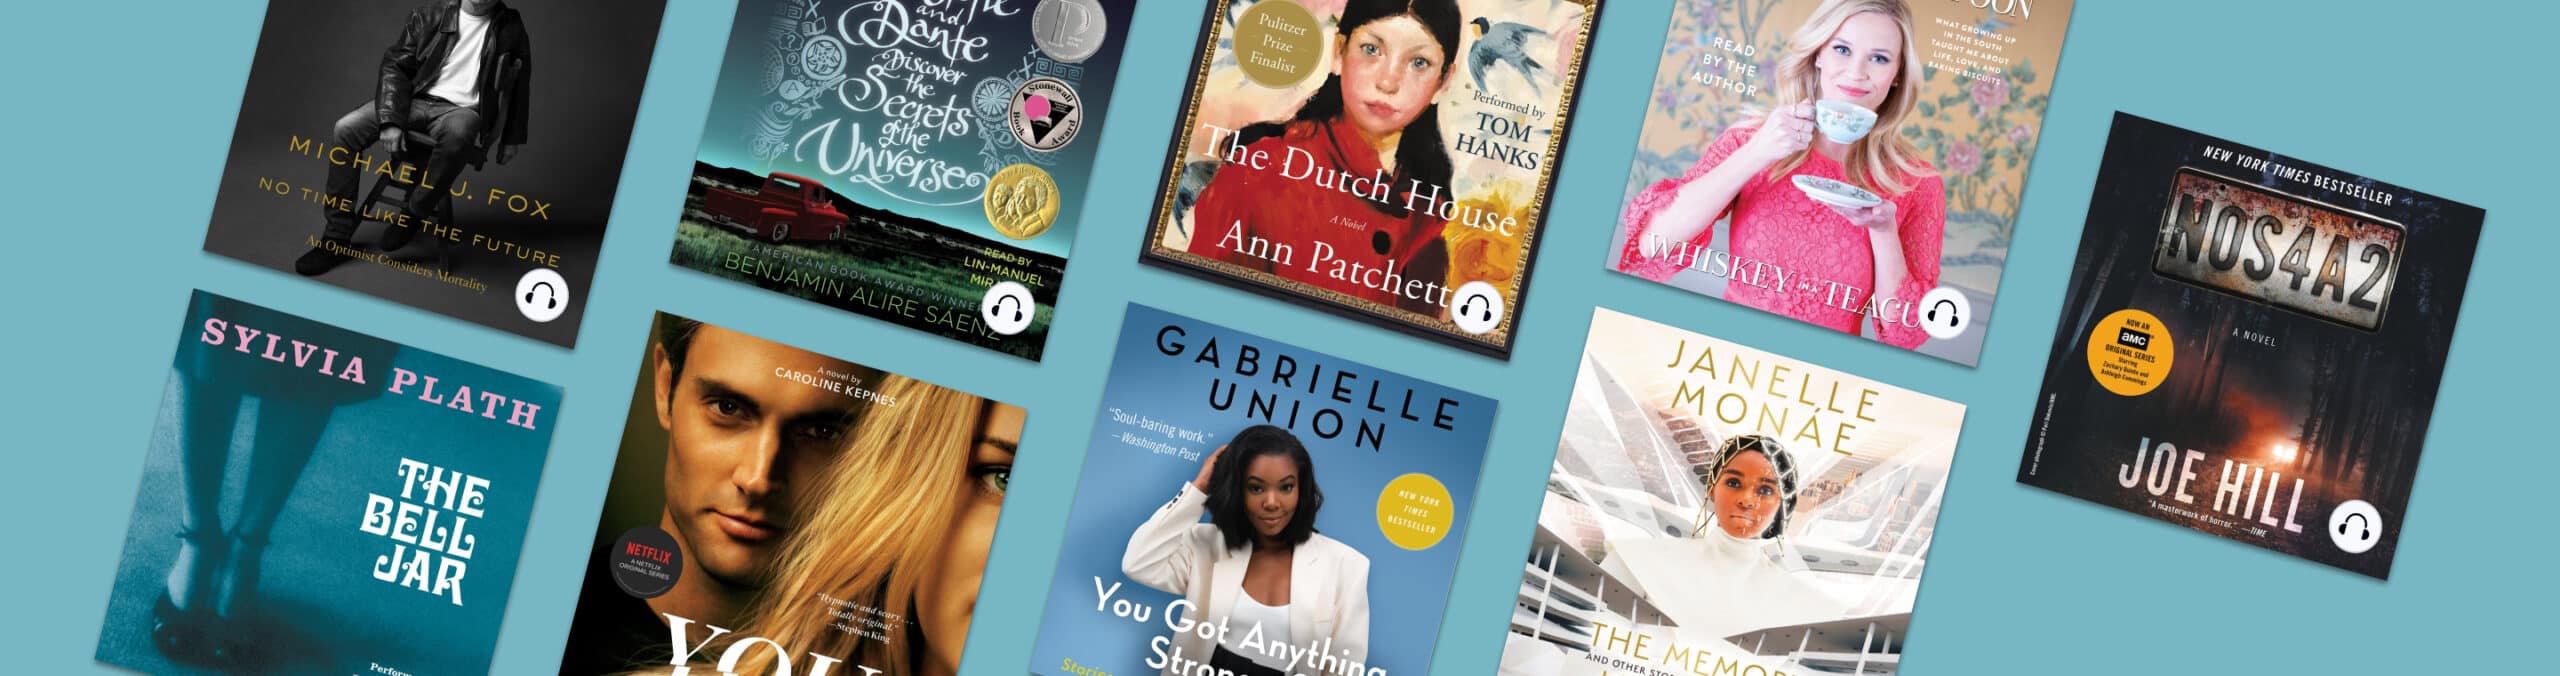 9 audiobooks read by your favorite celebrities